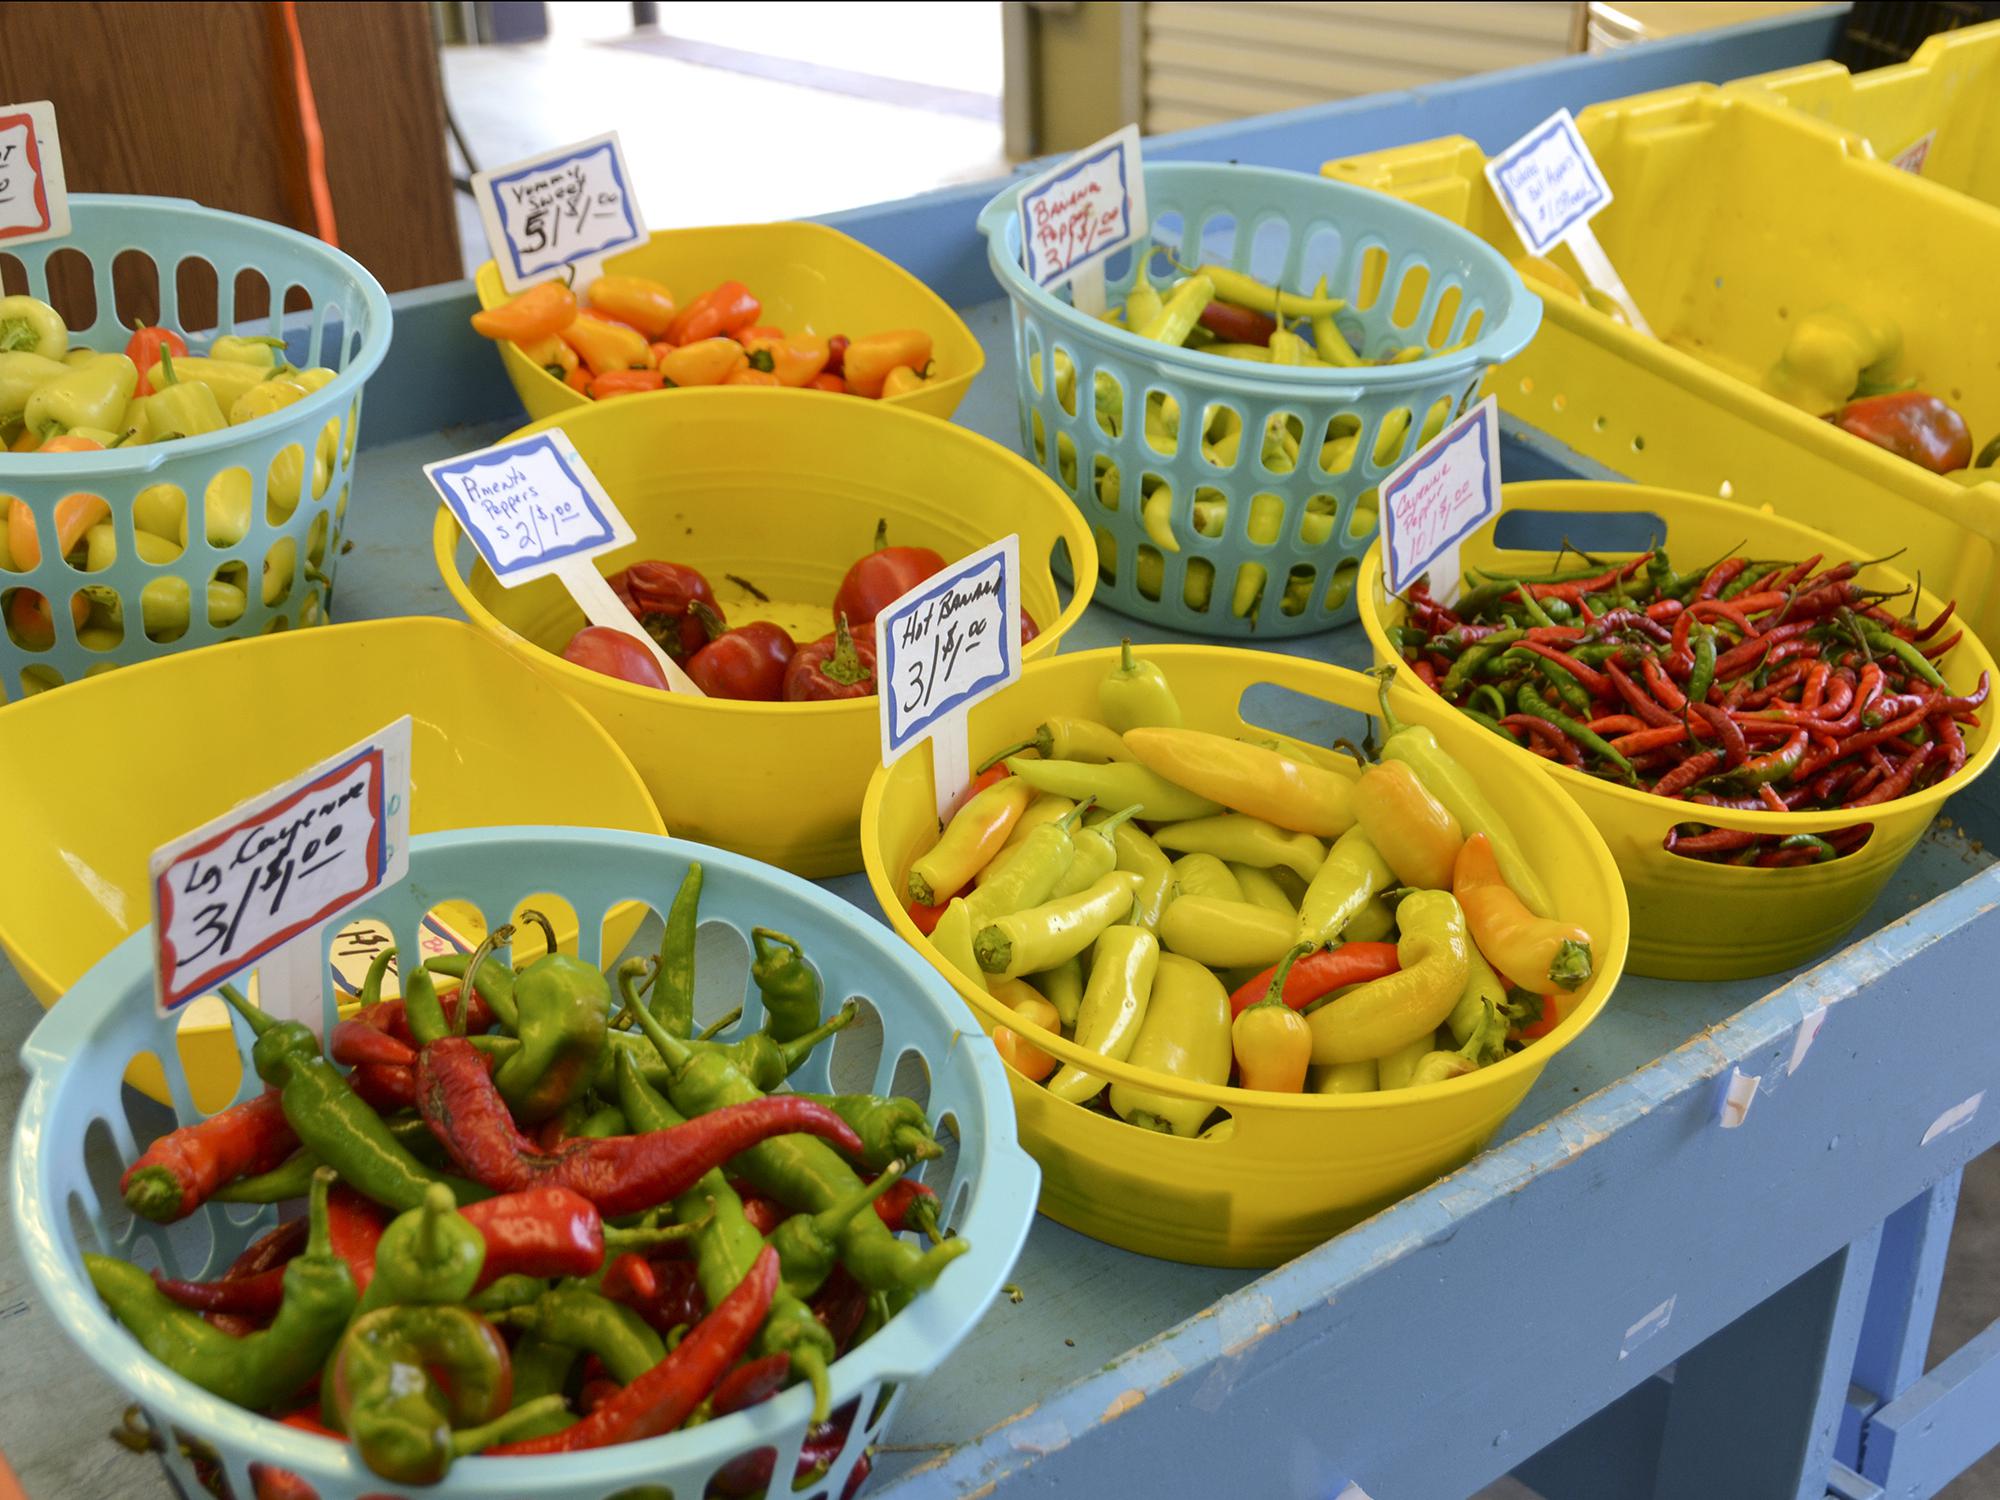 Cooper Farms, located in Smith County, offered a variety of colorful peppers at the Mississippi Farmers Market on High Street in Jackson, Mississippi, Aug. 5, 2014. Consumers increasingly turn to truck crops farmers for locally grown fruits and vegetables. (Photo by MSU Ag Communications/Susan Collins-Smith)